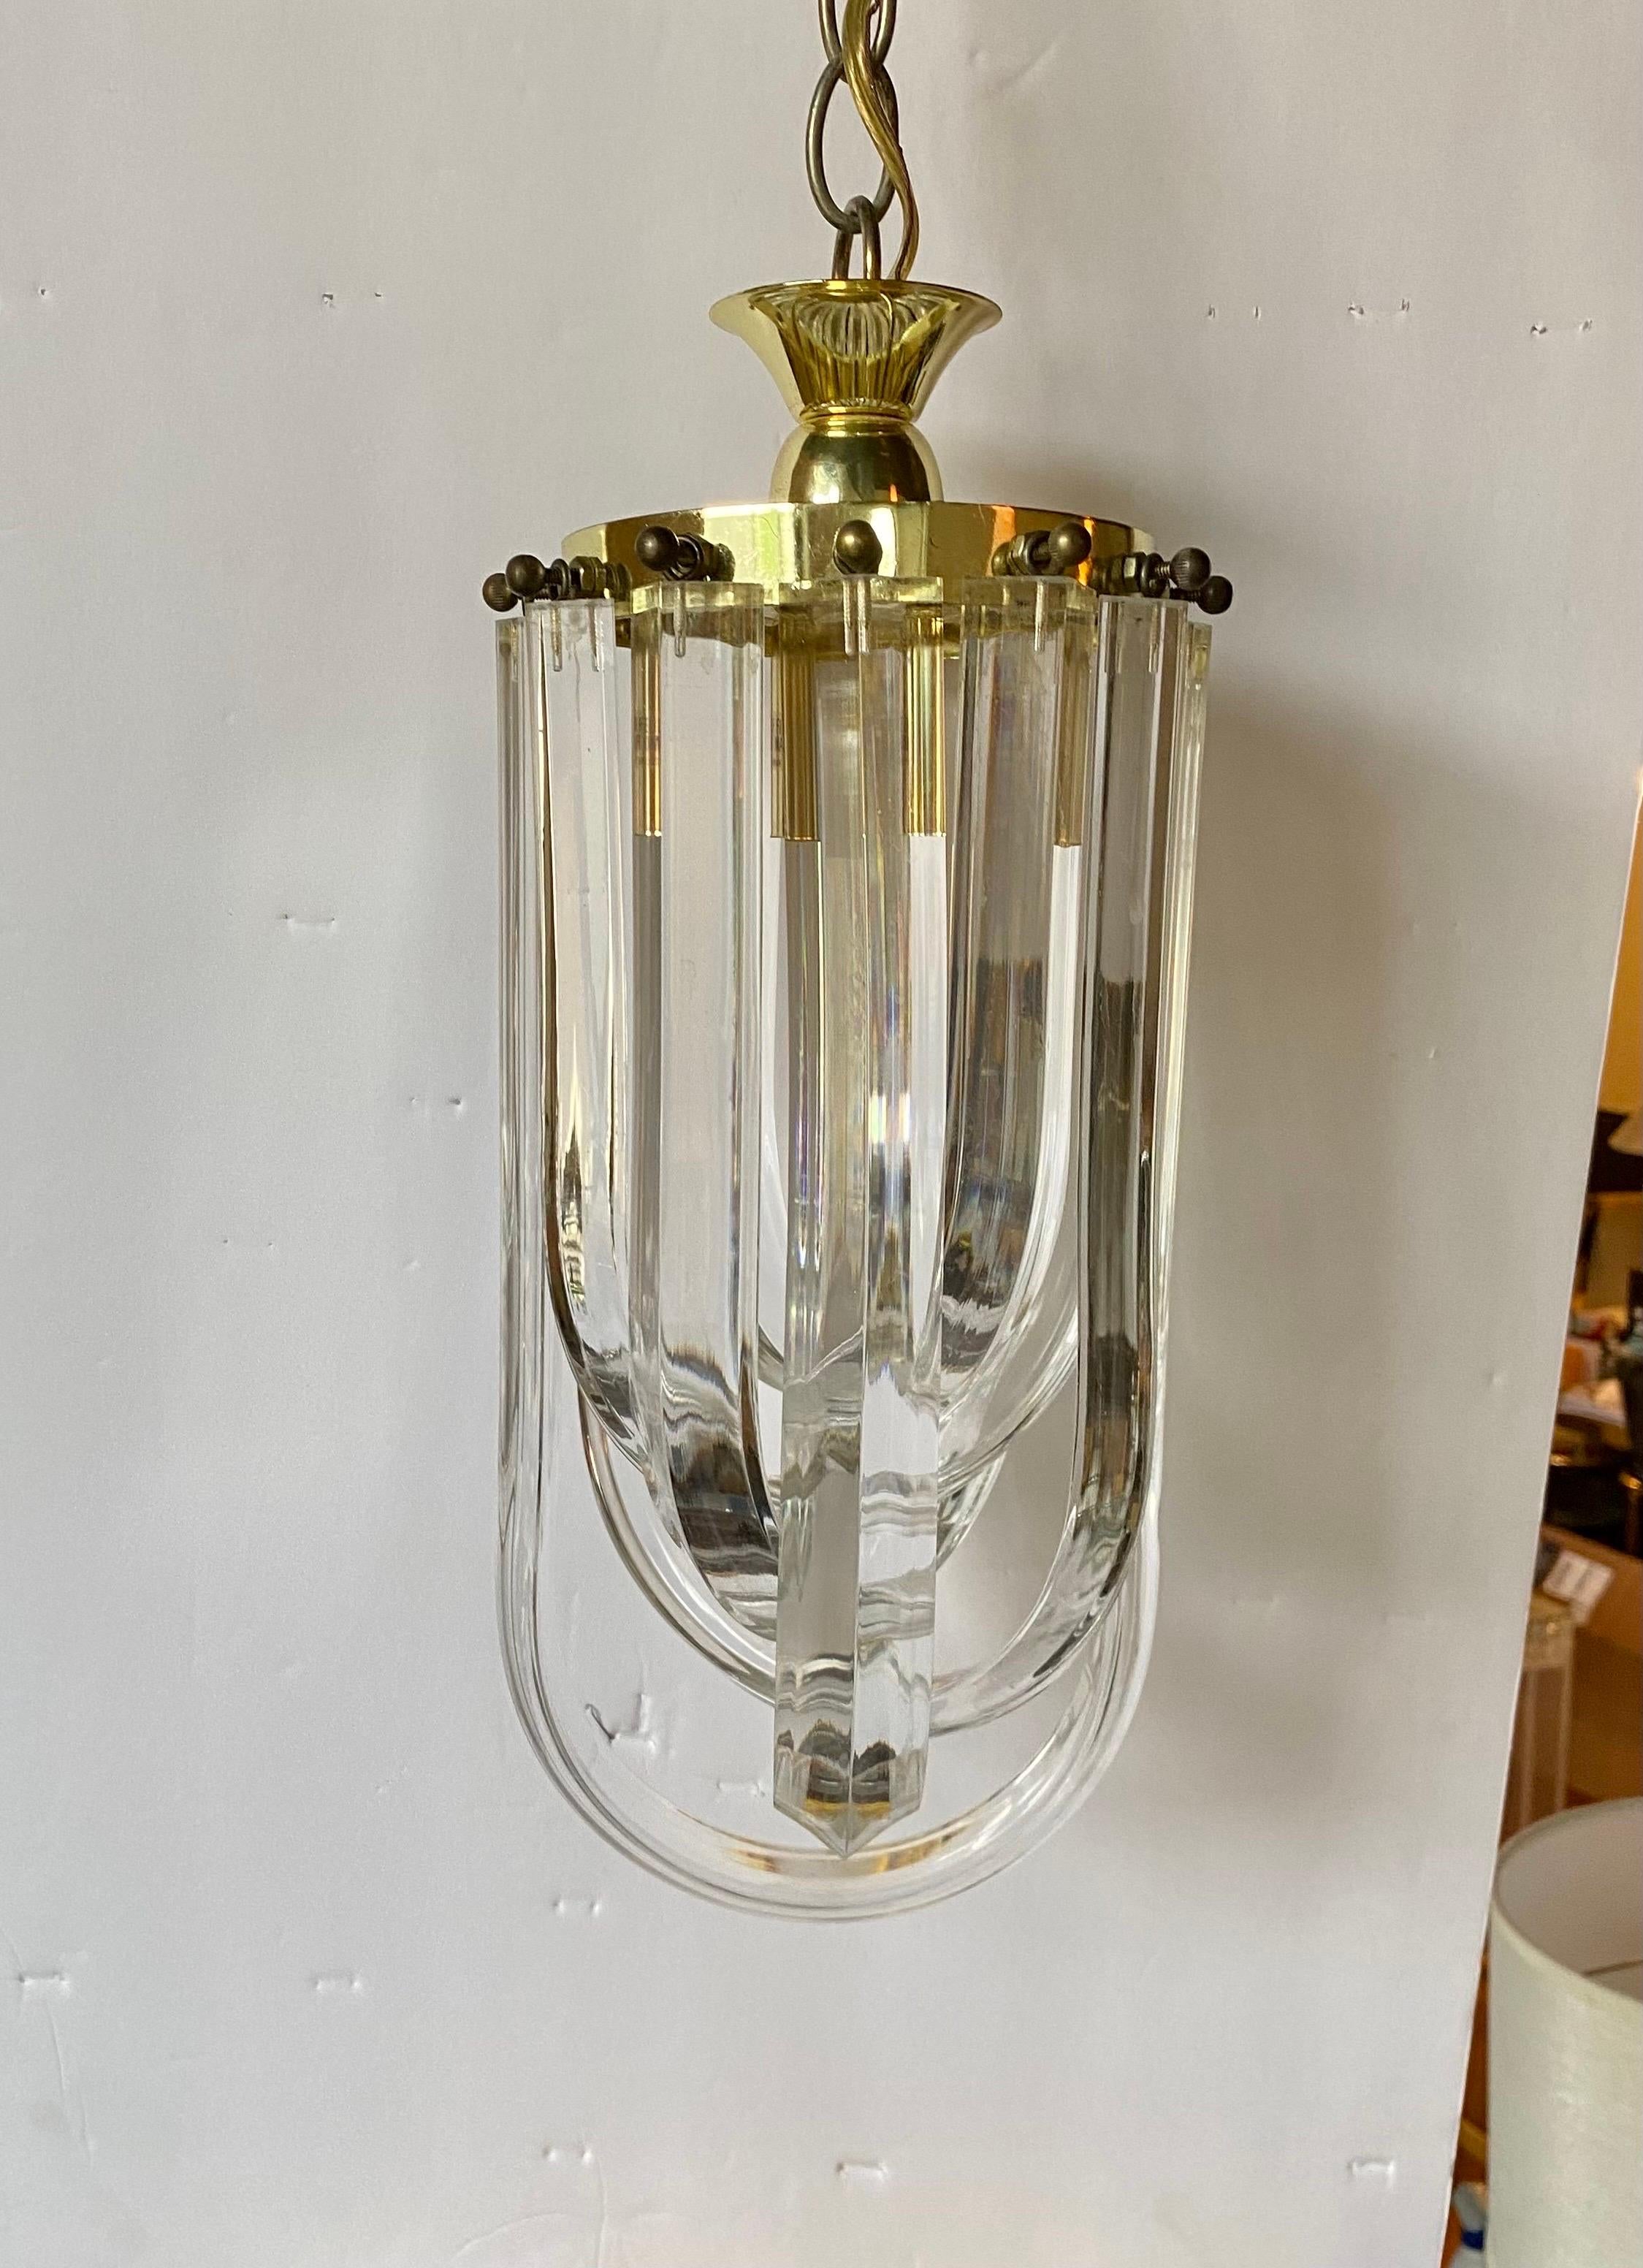 Mid-Century Modern bent Lucite ribbon chandelier pendant.  This sculptural light fixture features curved clear Lucite loops suspended from a gold brass plated frame.  Perfect size for a powder room bathroom or entry hallway. 

Chain measures 13